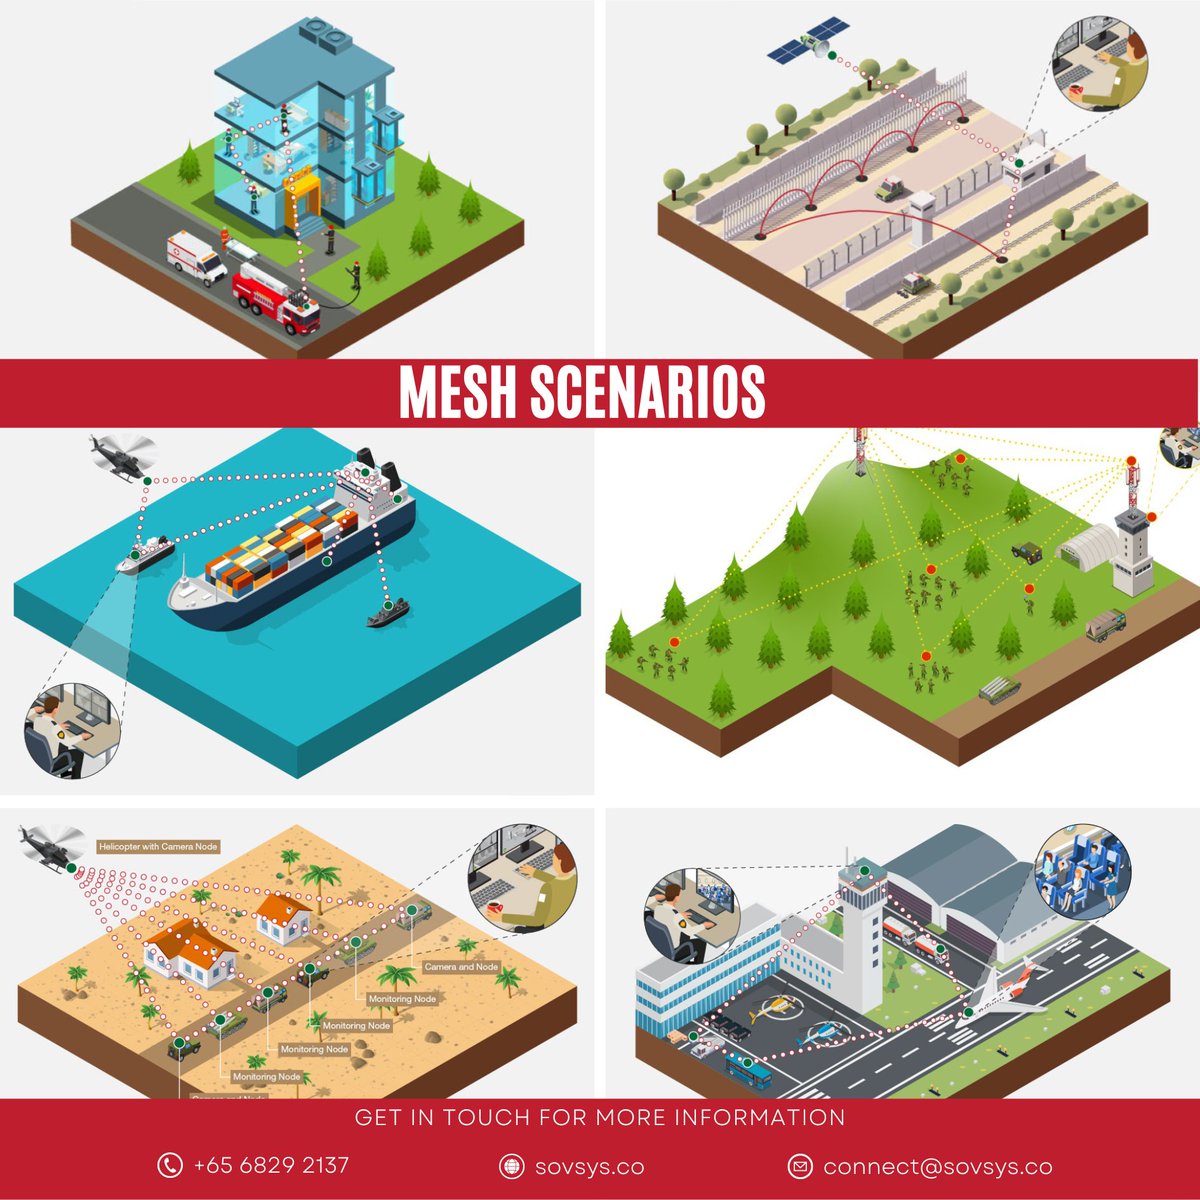 Our mMesh covers many scenarios, and ensures you have secure communications in cellular denied environments. #mesh #ipmesh #meshradio #meshnetwork #firstresponder #emergencyresponse #securecomms #securecommunications #sovsys #leo #bordercontrol #convoy #security